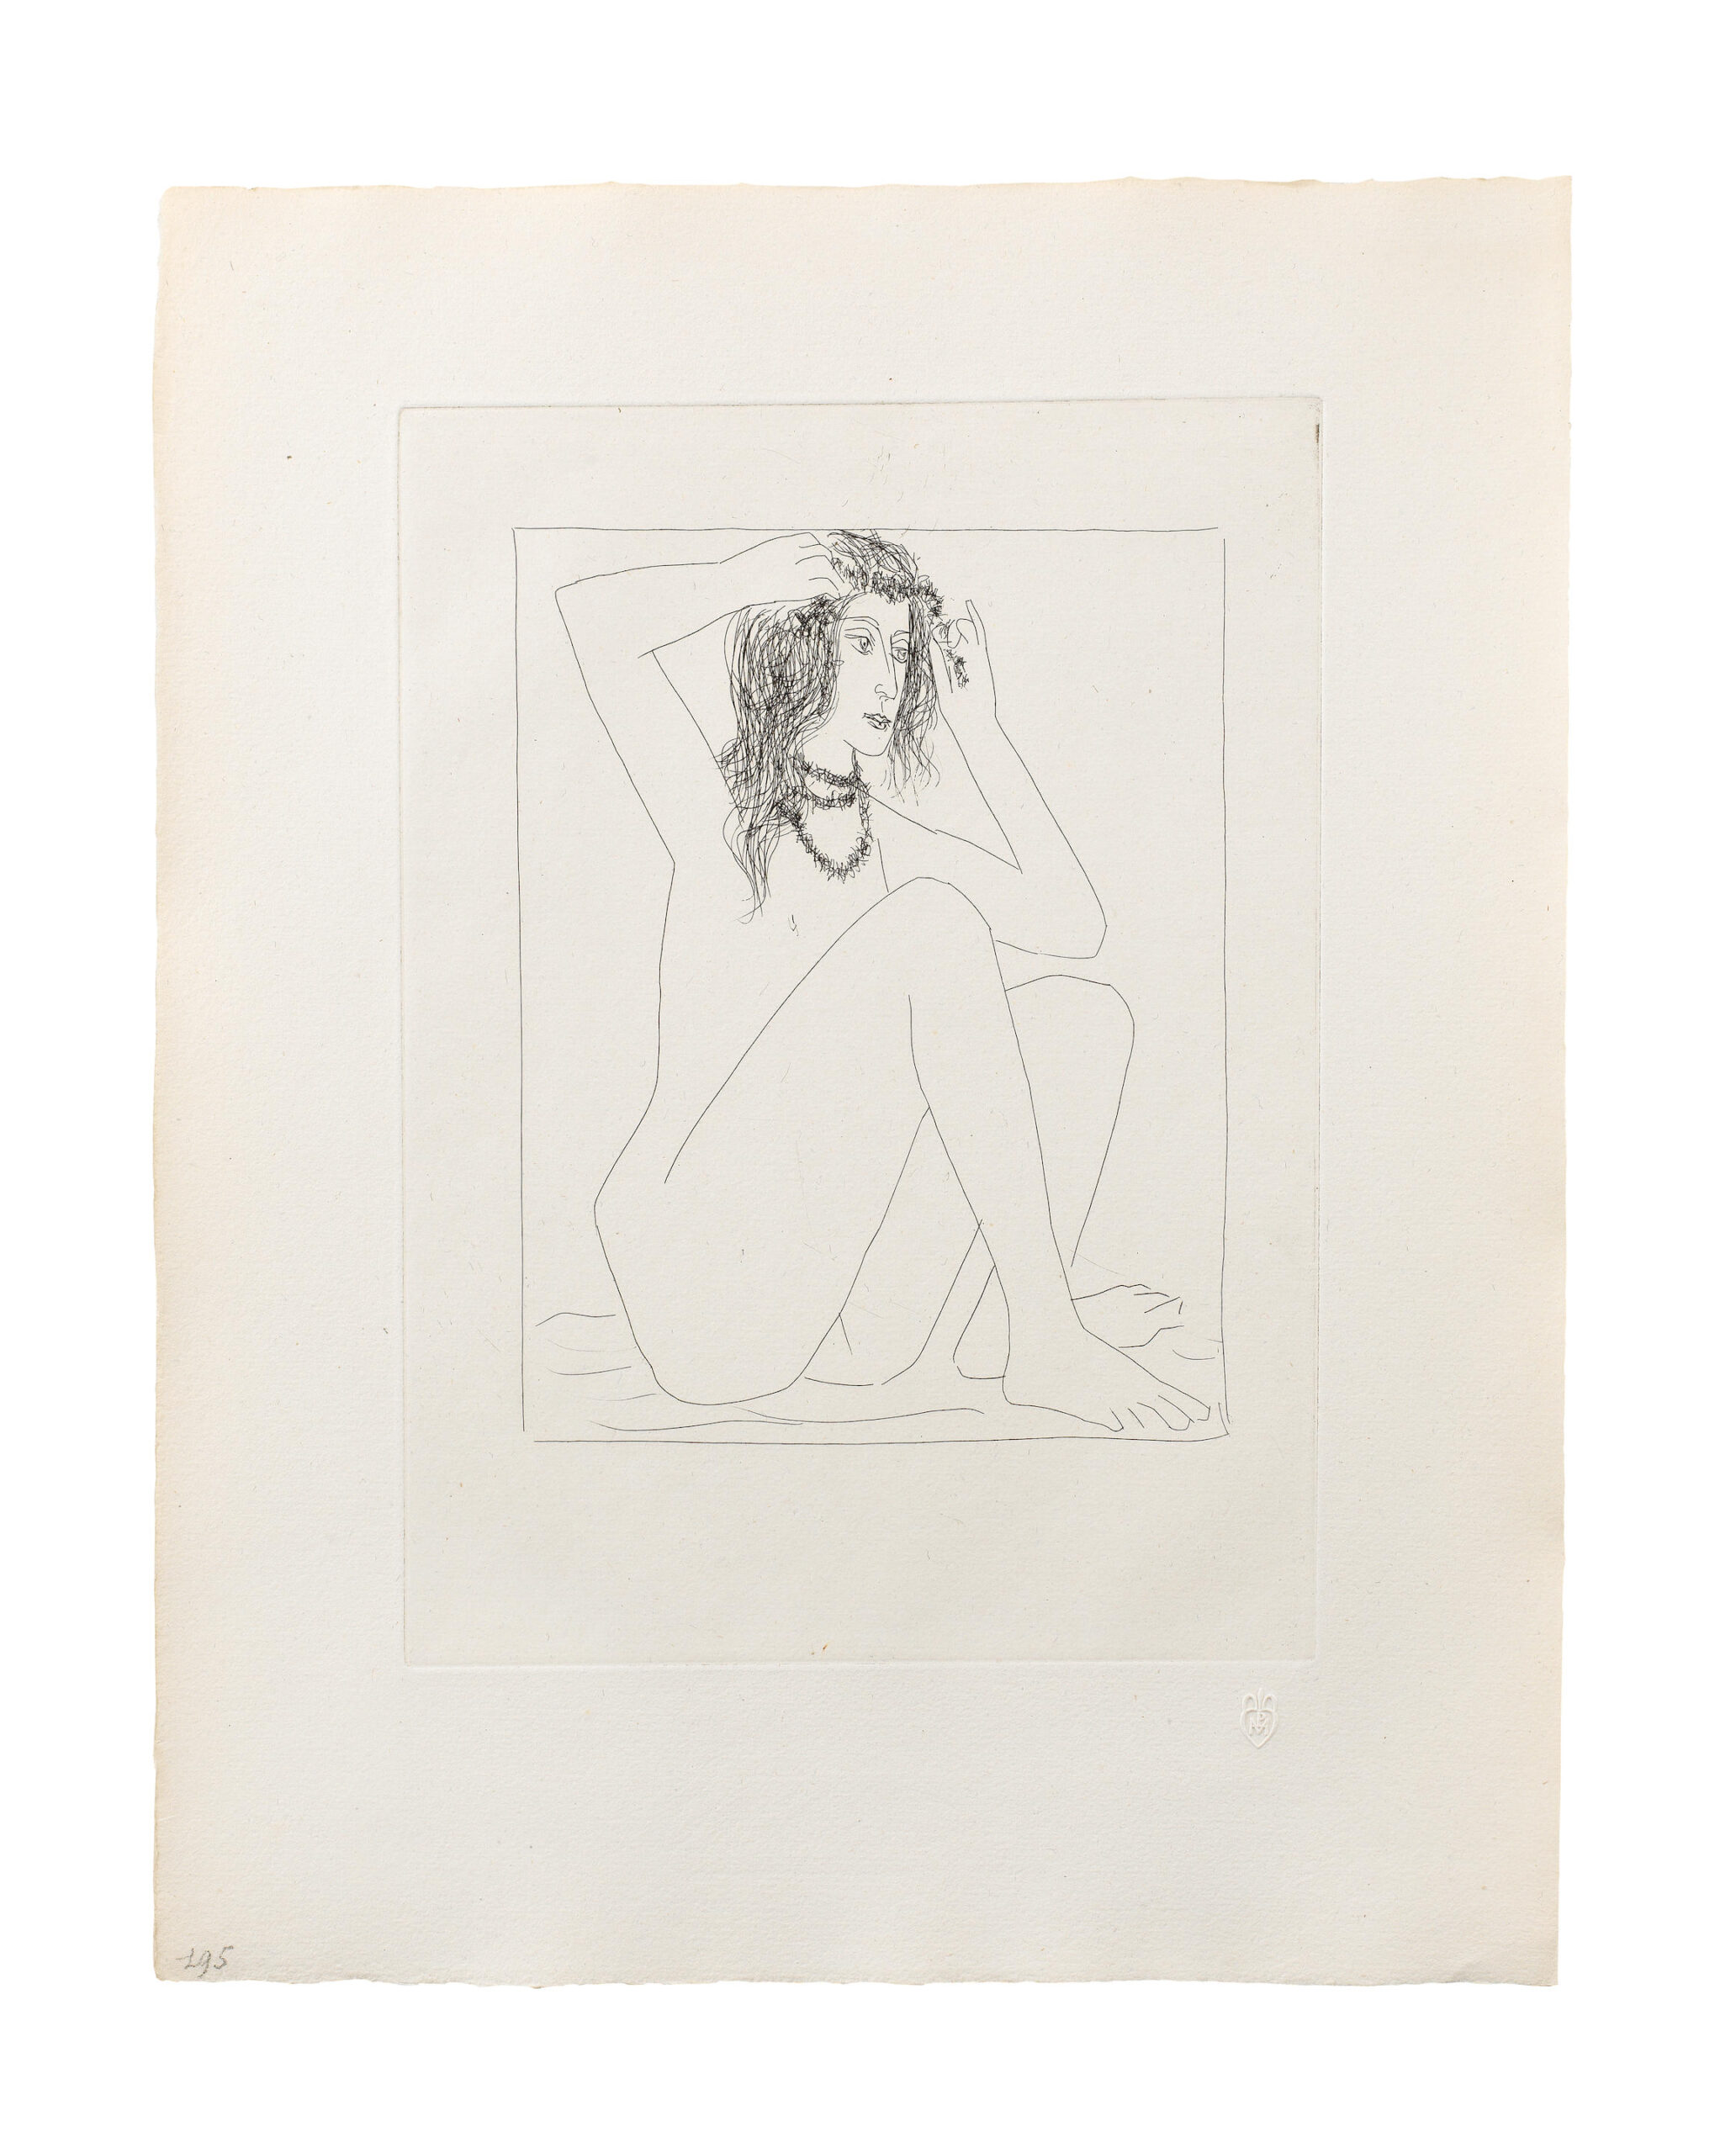 Pablo Picasso, Femme nue se couronnant de fleurs, 1930, drypoint etching, 12,3 x 8,7 in, from the Suite Vollard
